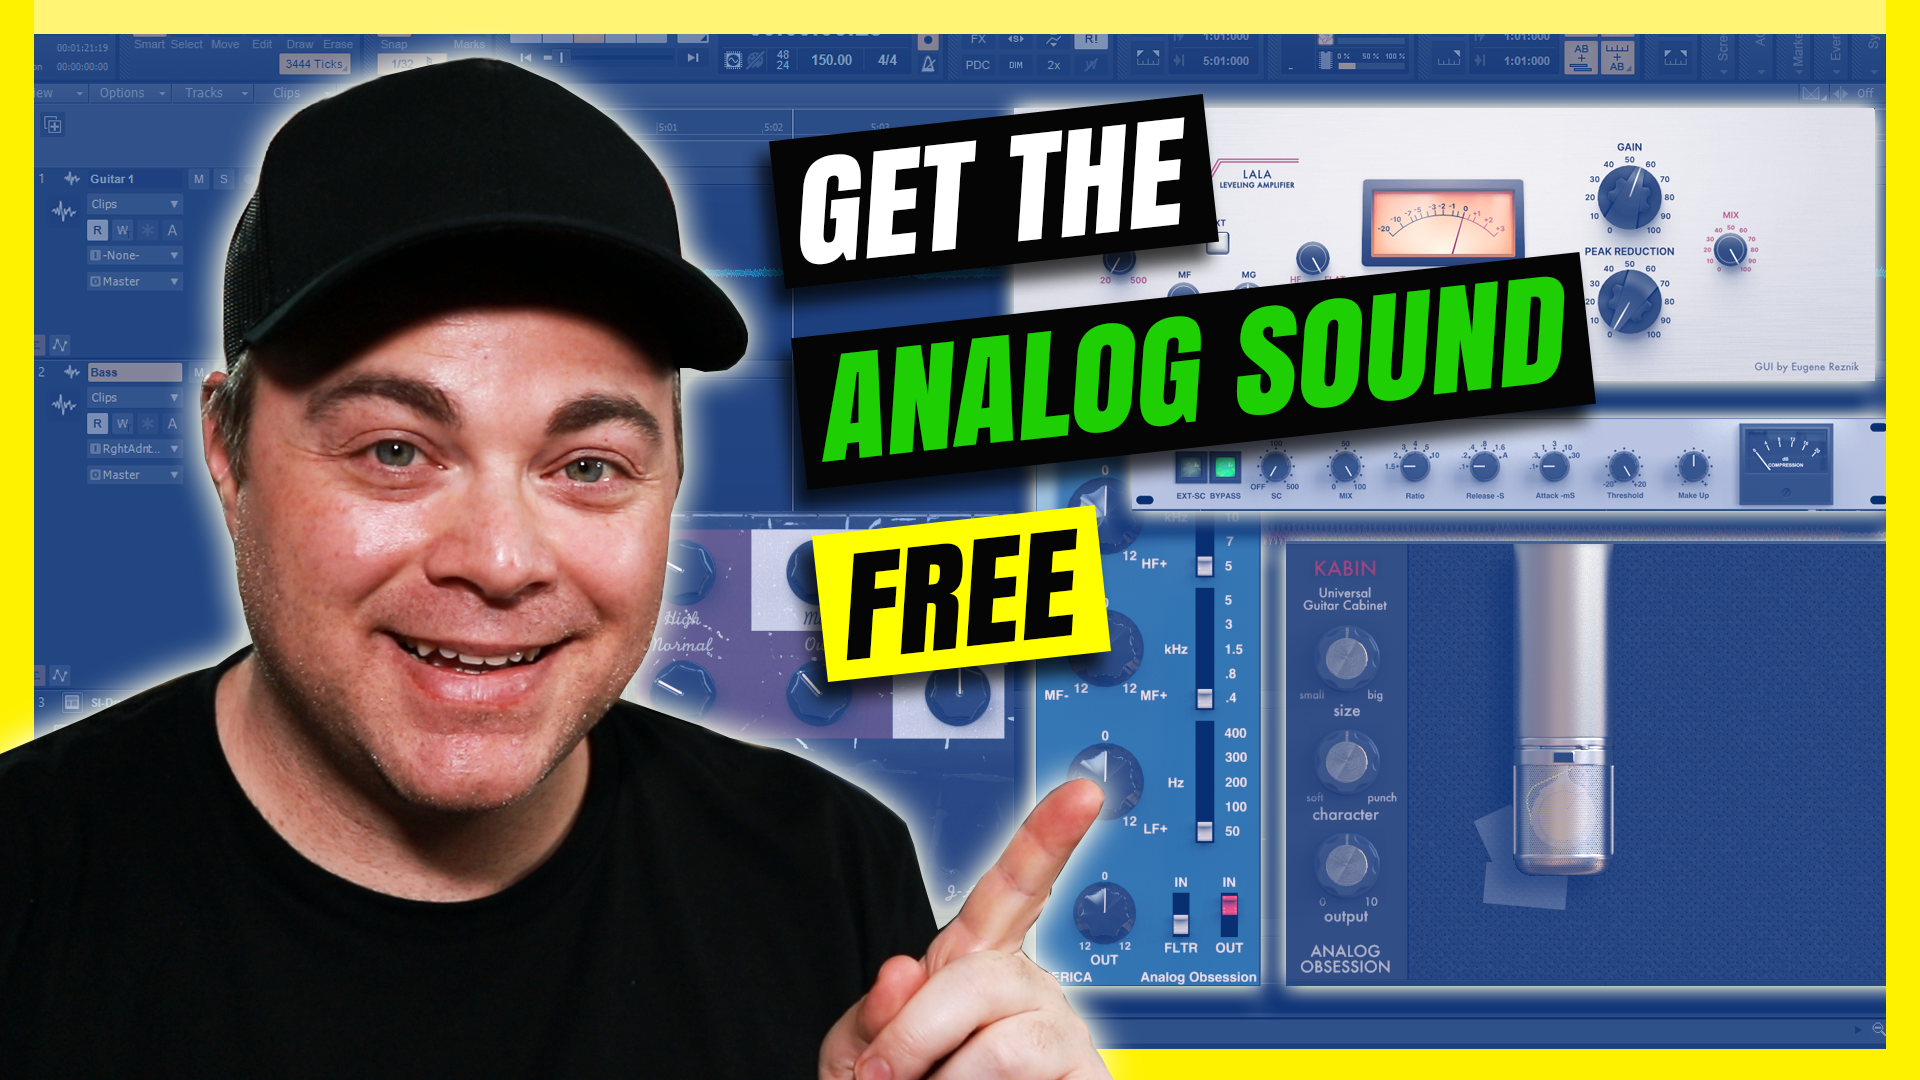 Free Vst Plugins From Analog Obsession That Can Get You The Analog